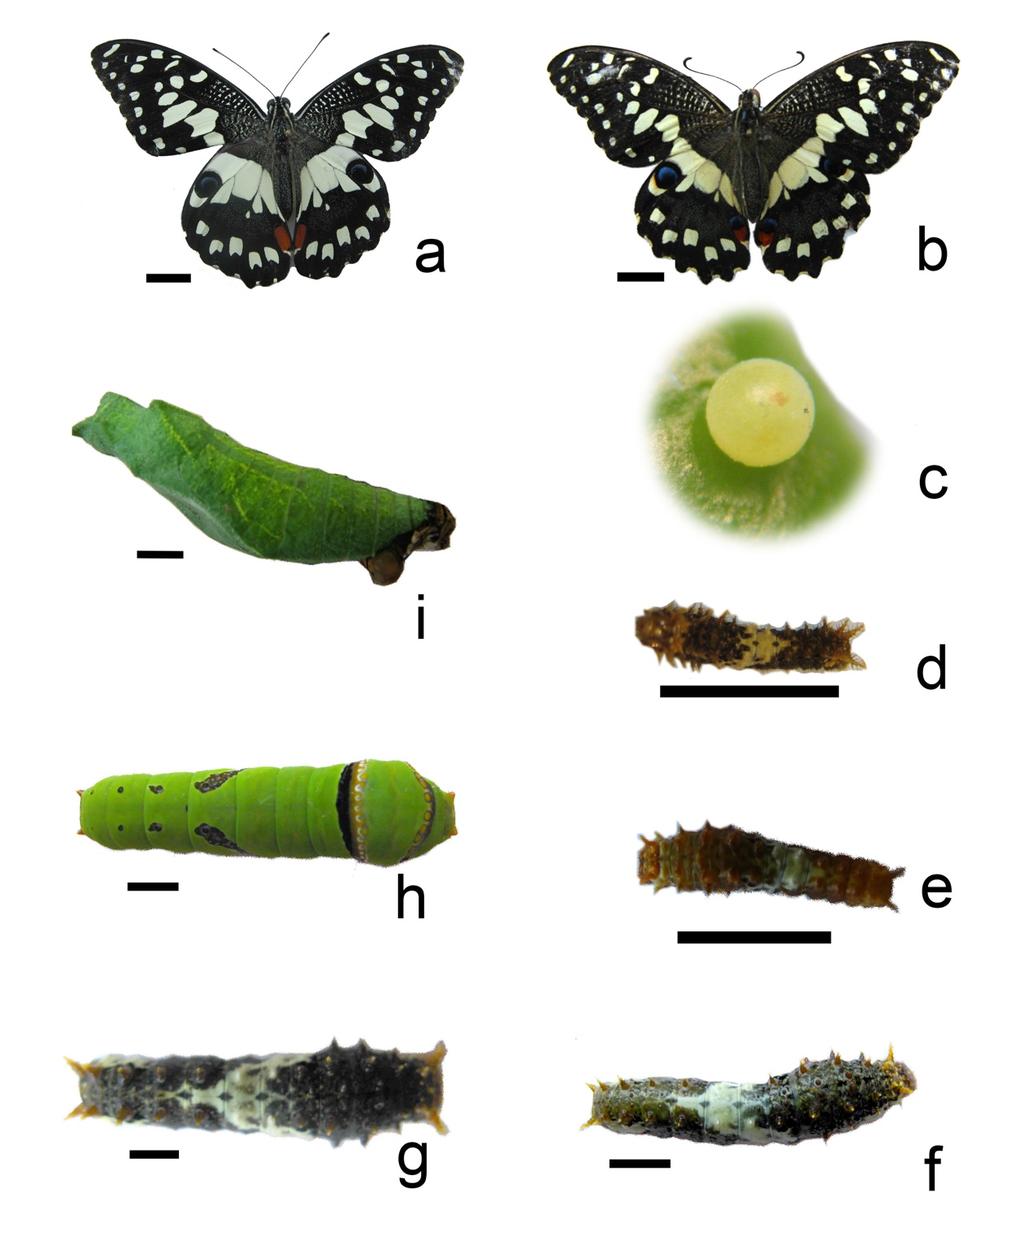 Figure 1. Lifecycle of The citrus butterfly Papilio demoleus: a. Female butterfly; b. Male butterfly; c. Egg; d. 1 st instar larvae; e. 2 nd instar larvae; f. 3 rd instar larvae; g.